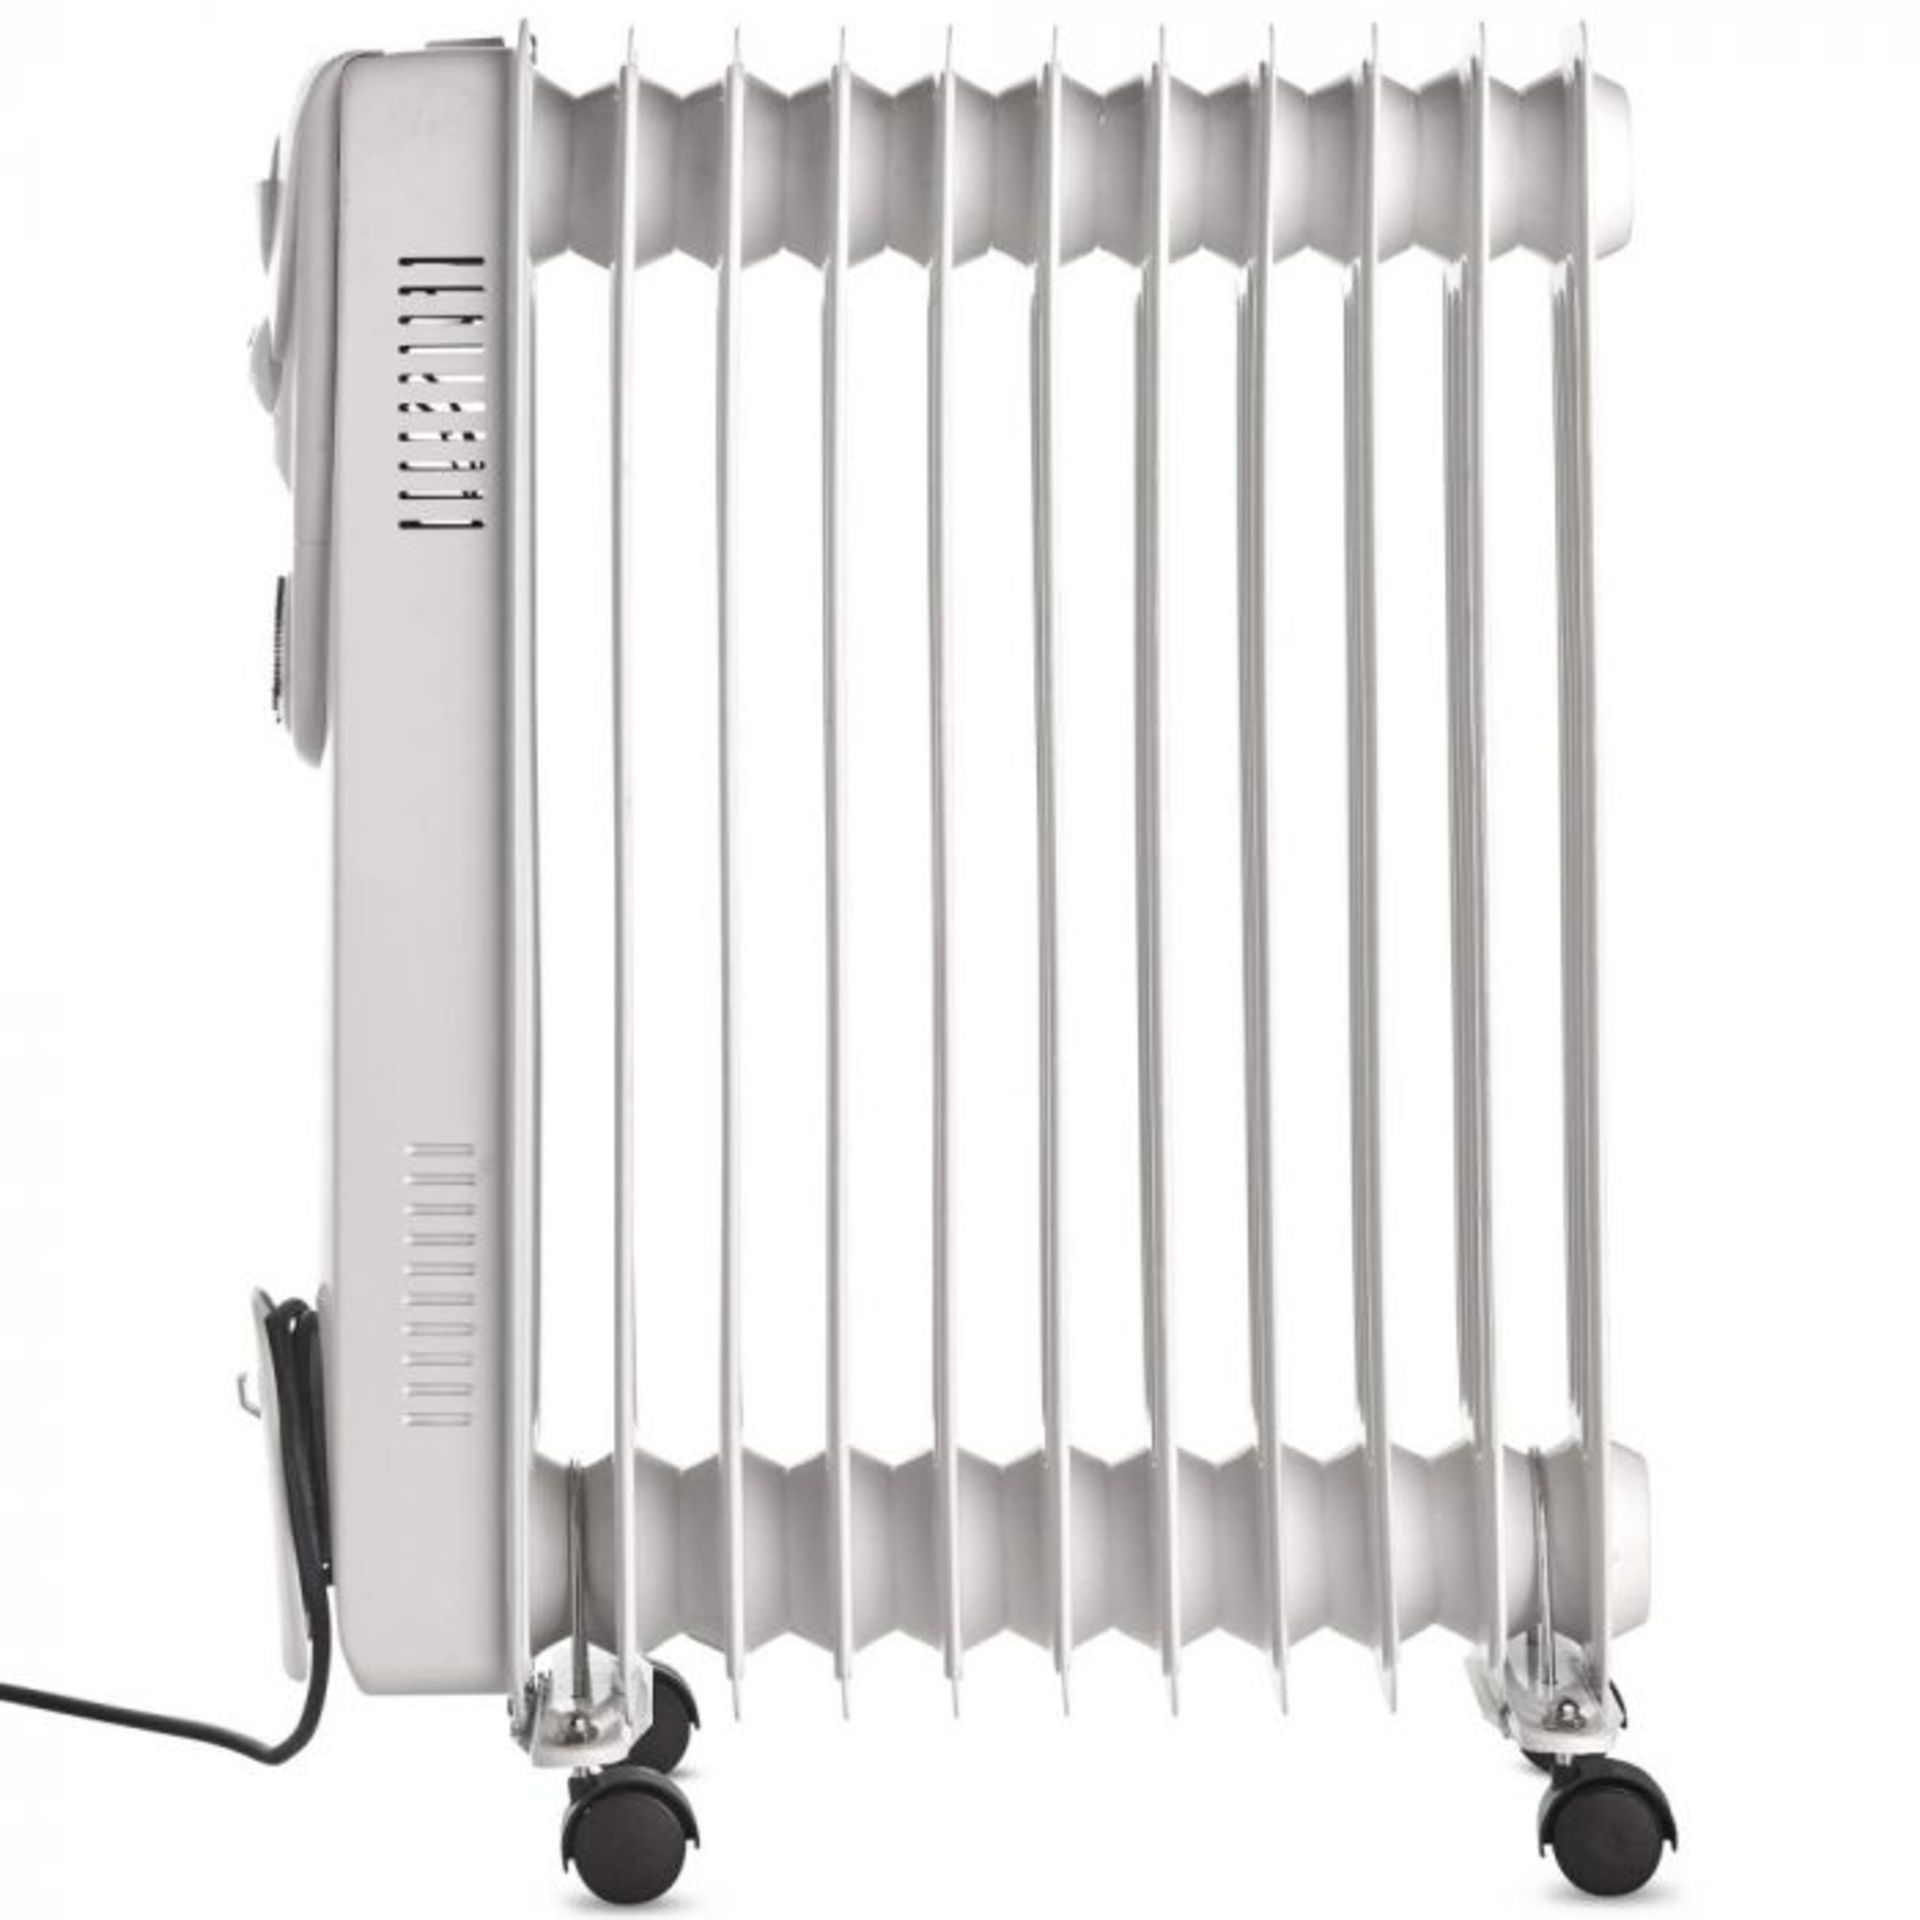 (V172) 11 Fin 2500W Oil Filled Radiator - White Suitable for areas up to 28 square metres 3 p... - Image 3 of 3